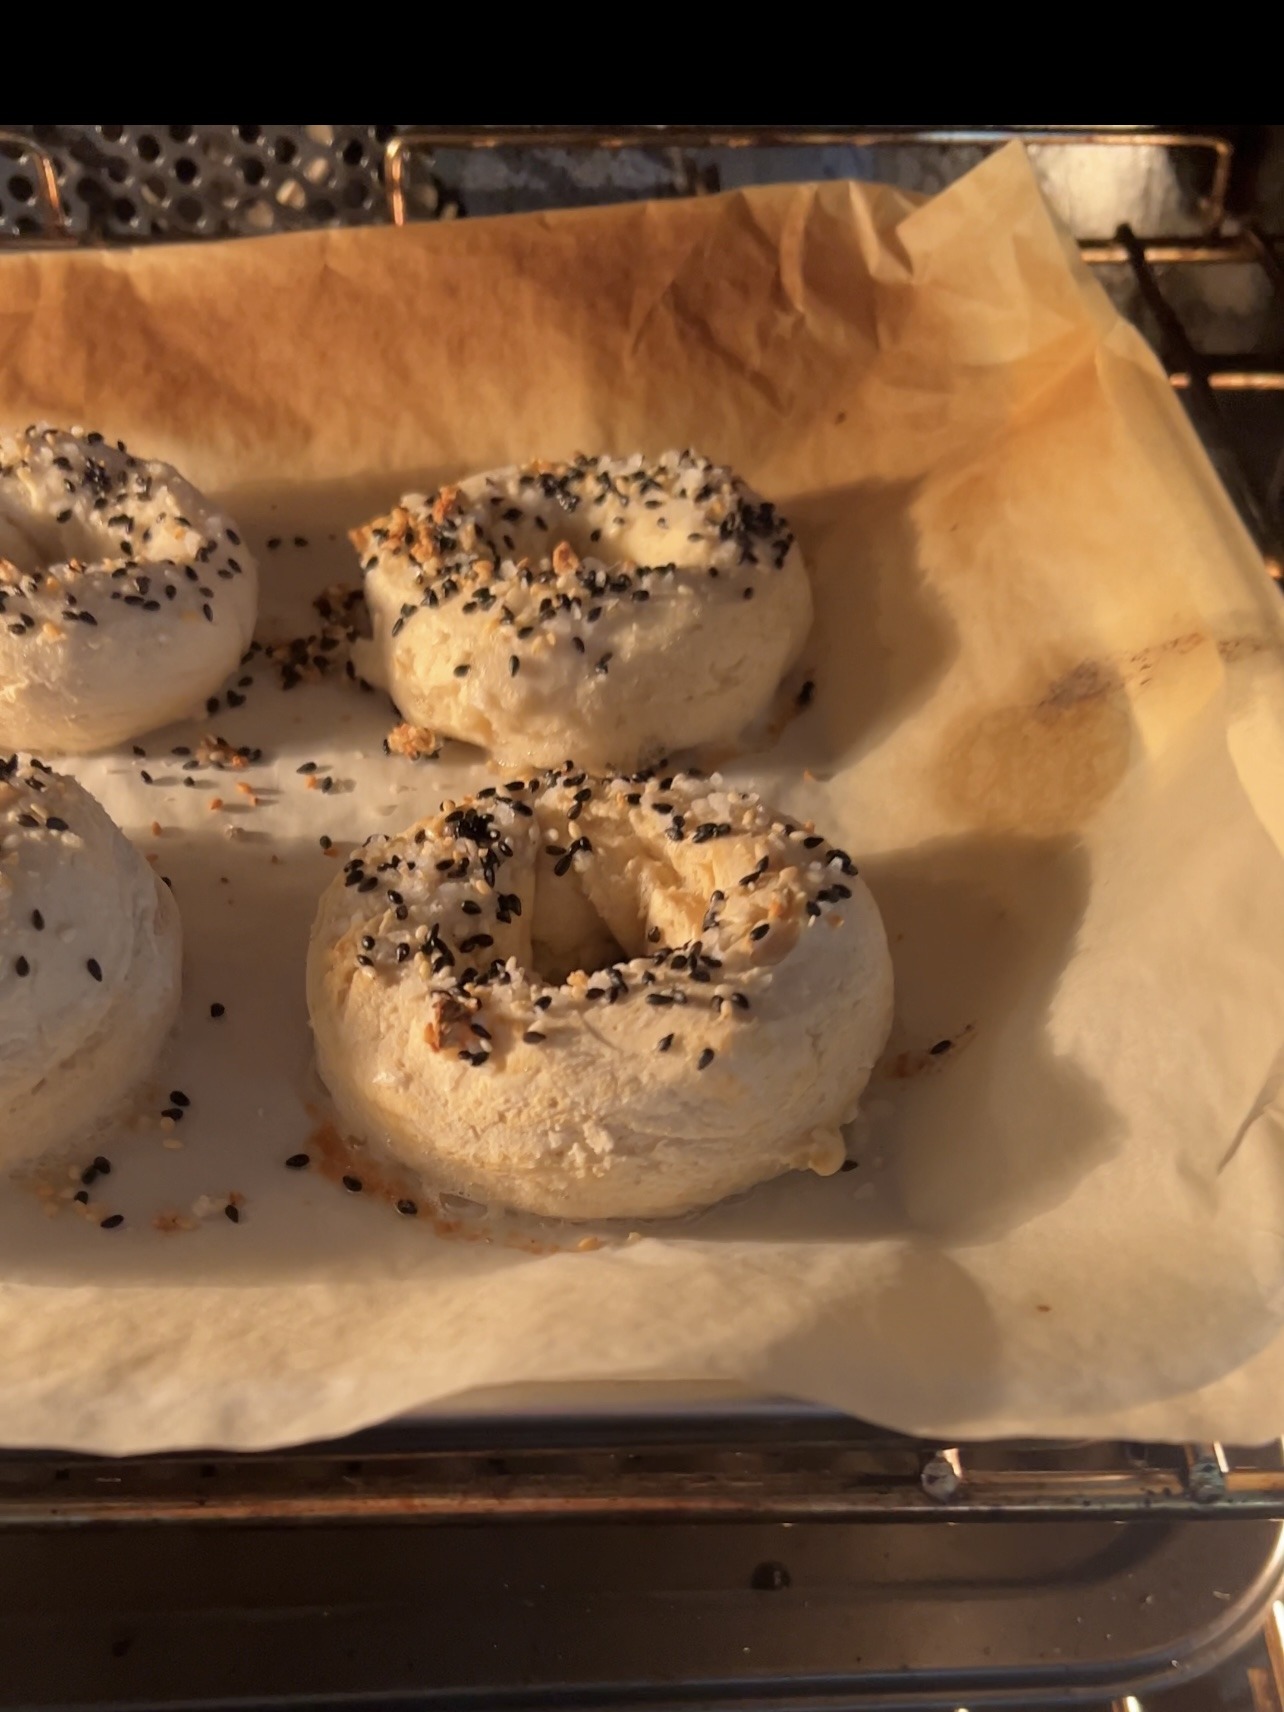 Step 4: Bake in the oven for 15 minutes or until the bagels are lightly golden on the bottom. To give the bagels more color, you may broil them for 1-2 minutes at the end. Enjoy warm, spread with vegan butter or cream cheese.